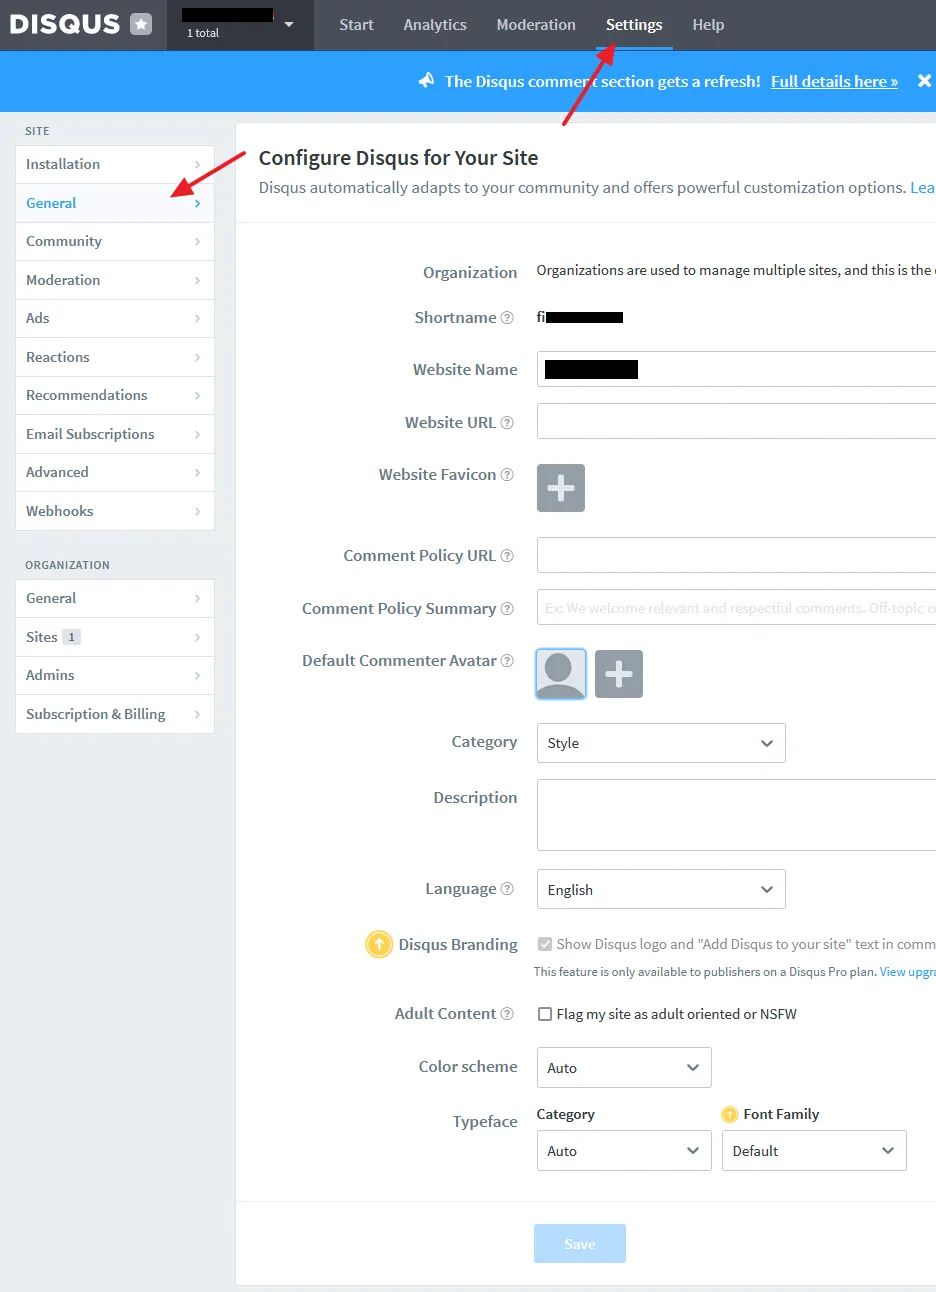 On your Disqus Dashboard, click on the Settings tab. Click on the General tab from the sidebar. You can find your Shortname on top of the page, just below the Organization.